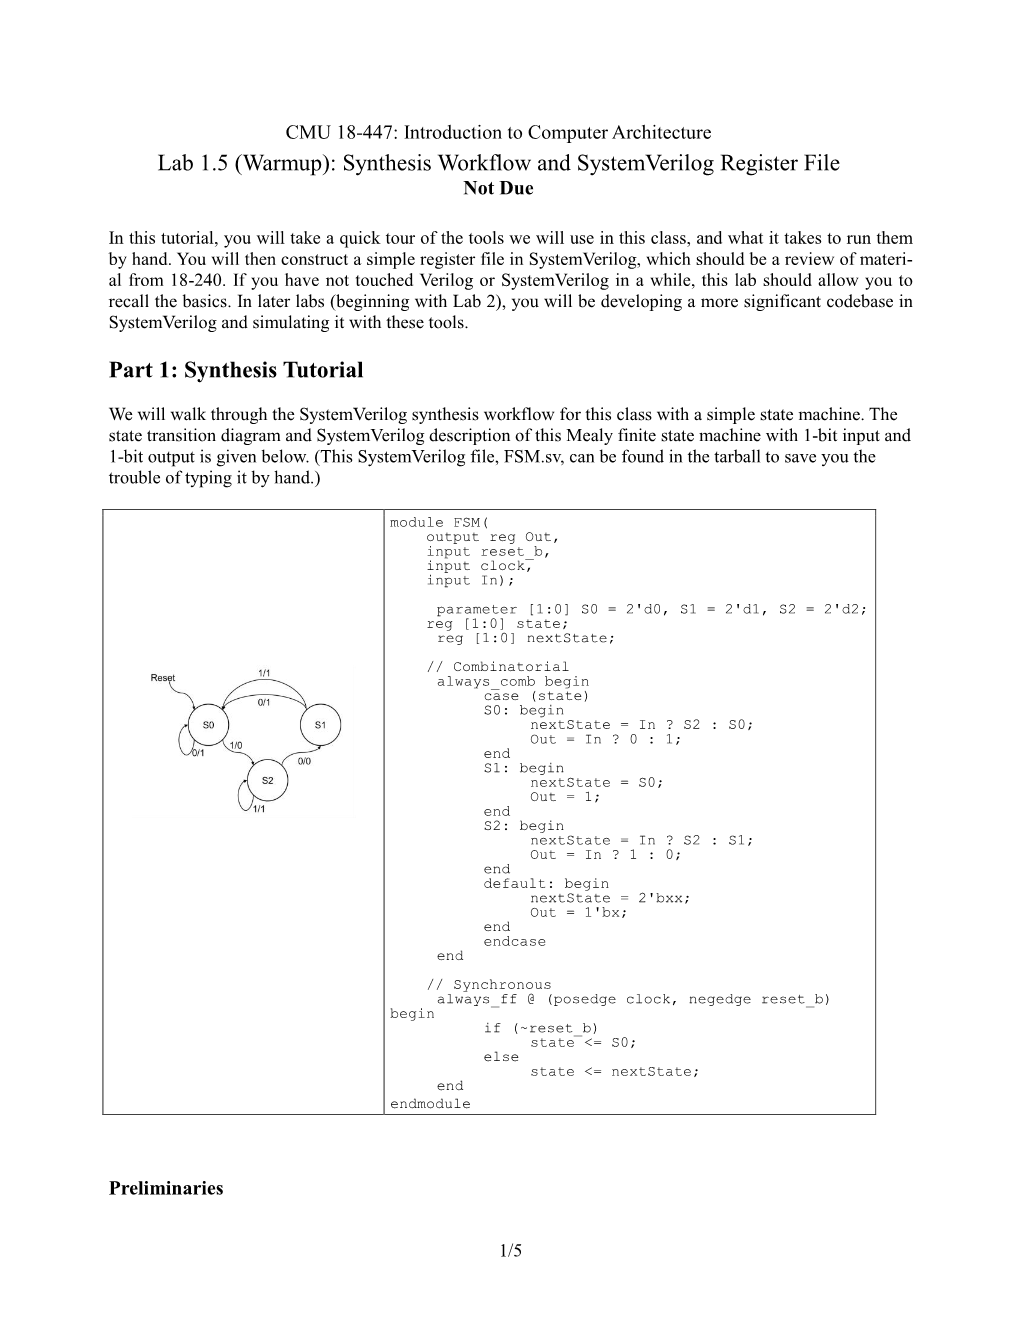 Lab 1.5 (Warmup): Synthesis Workflow and Systemverilog Register File Part 1: Synthesis Tutorial